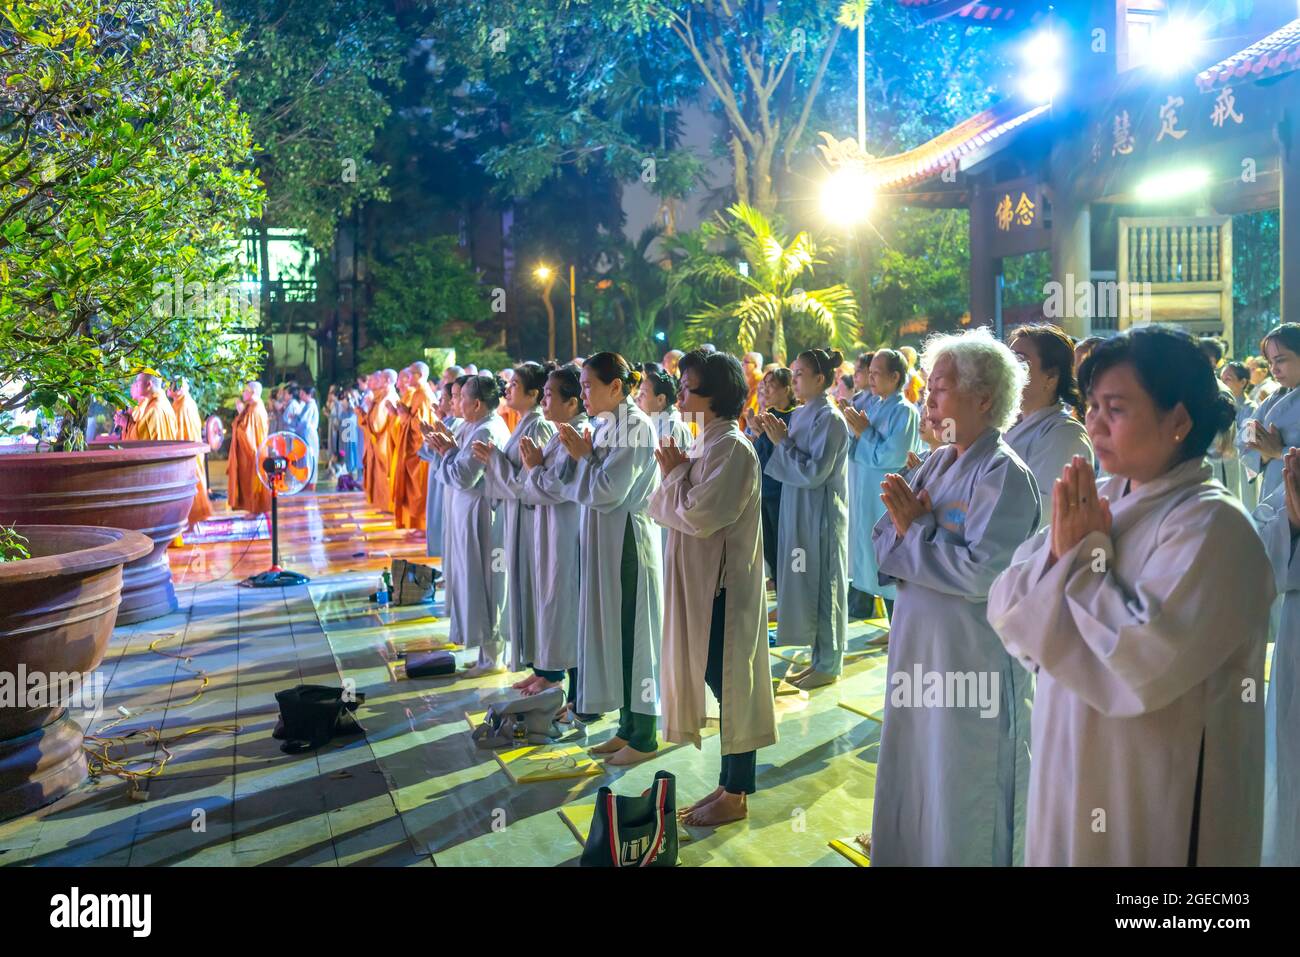 Monks and Buddhists are reverently bowing to Buddha during evening ceremony for Amitabha Buddha at an ancient temple in Ho Chi Minh City, Vietnam Stock Photo